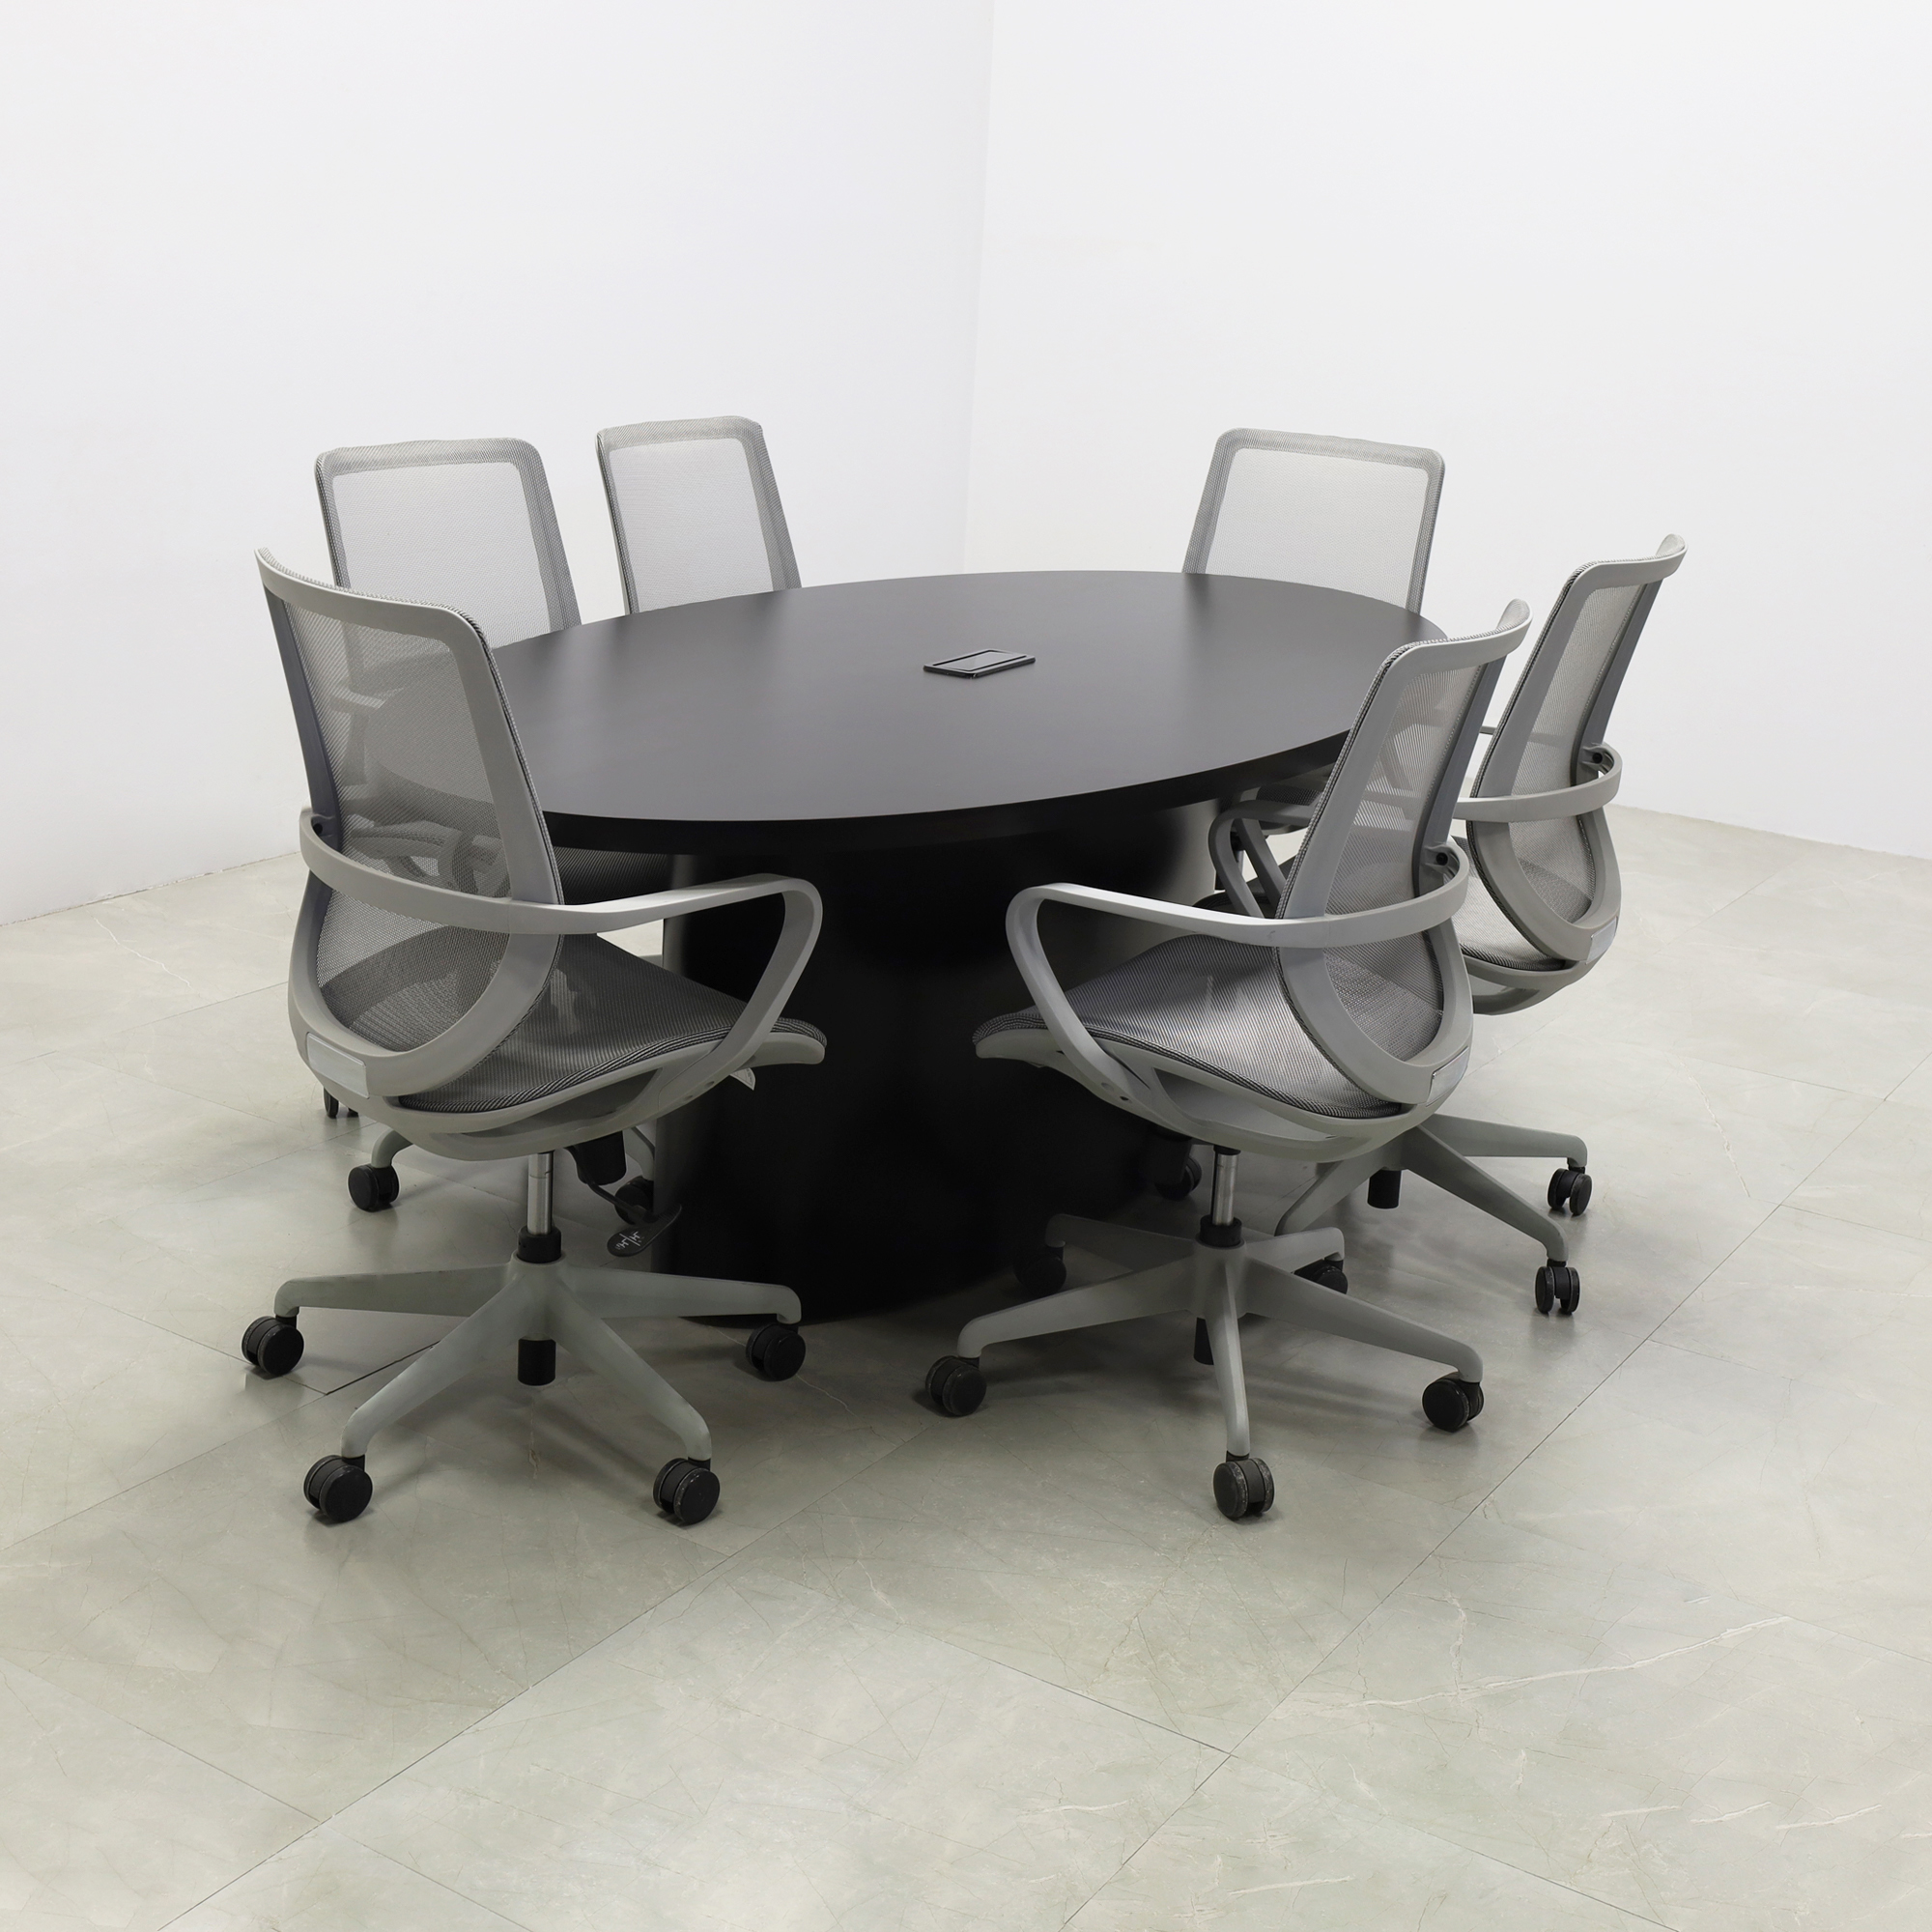 84-inch Newton Oval Conference Table With Laminate Top in black matte laminate top and base, with black powerbox, shown here.